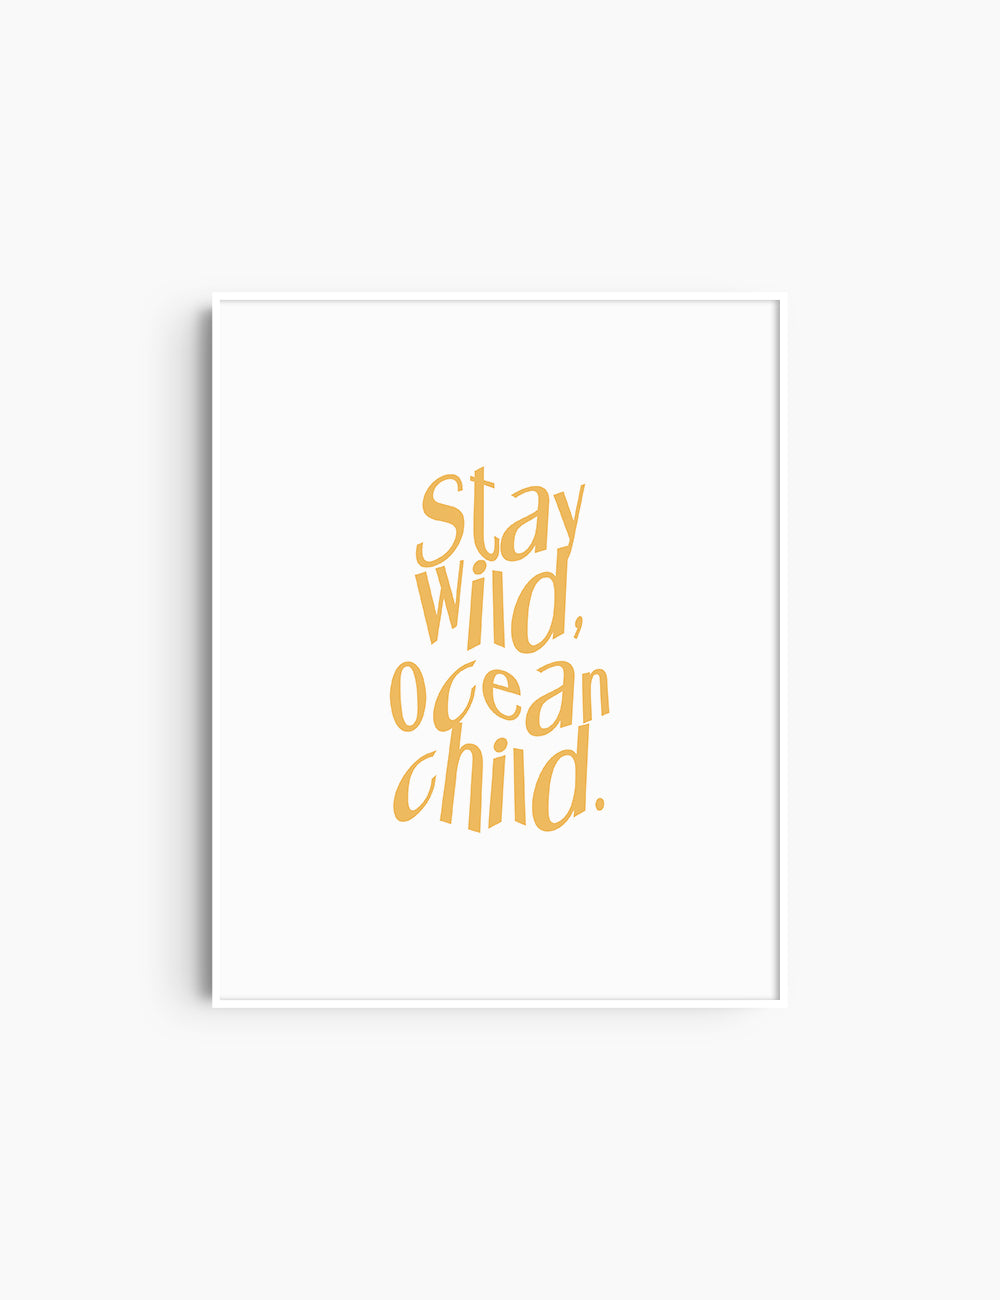 STAY WILD, OCEAN CHILD. Yellow and White. Printable Wall Art Quote.